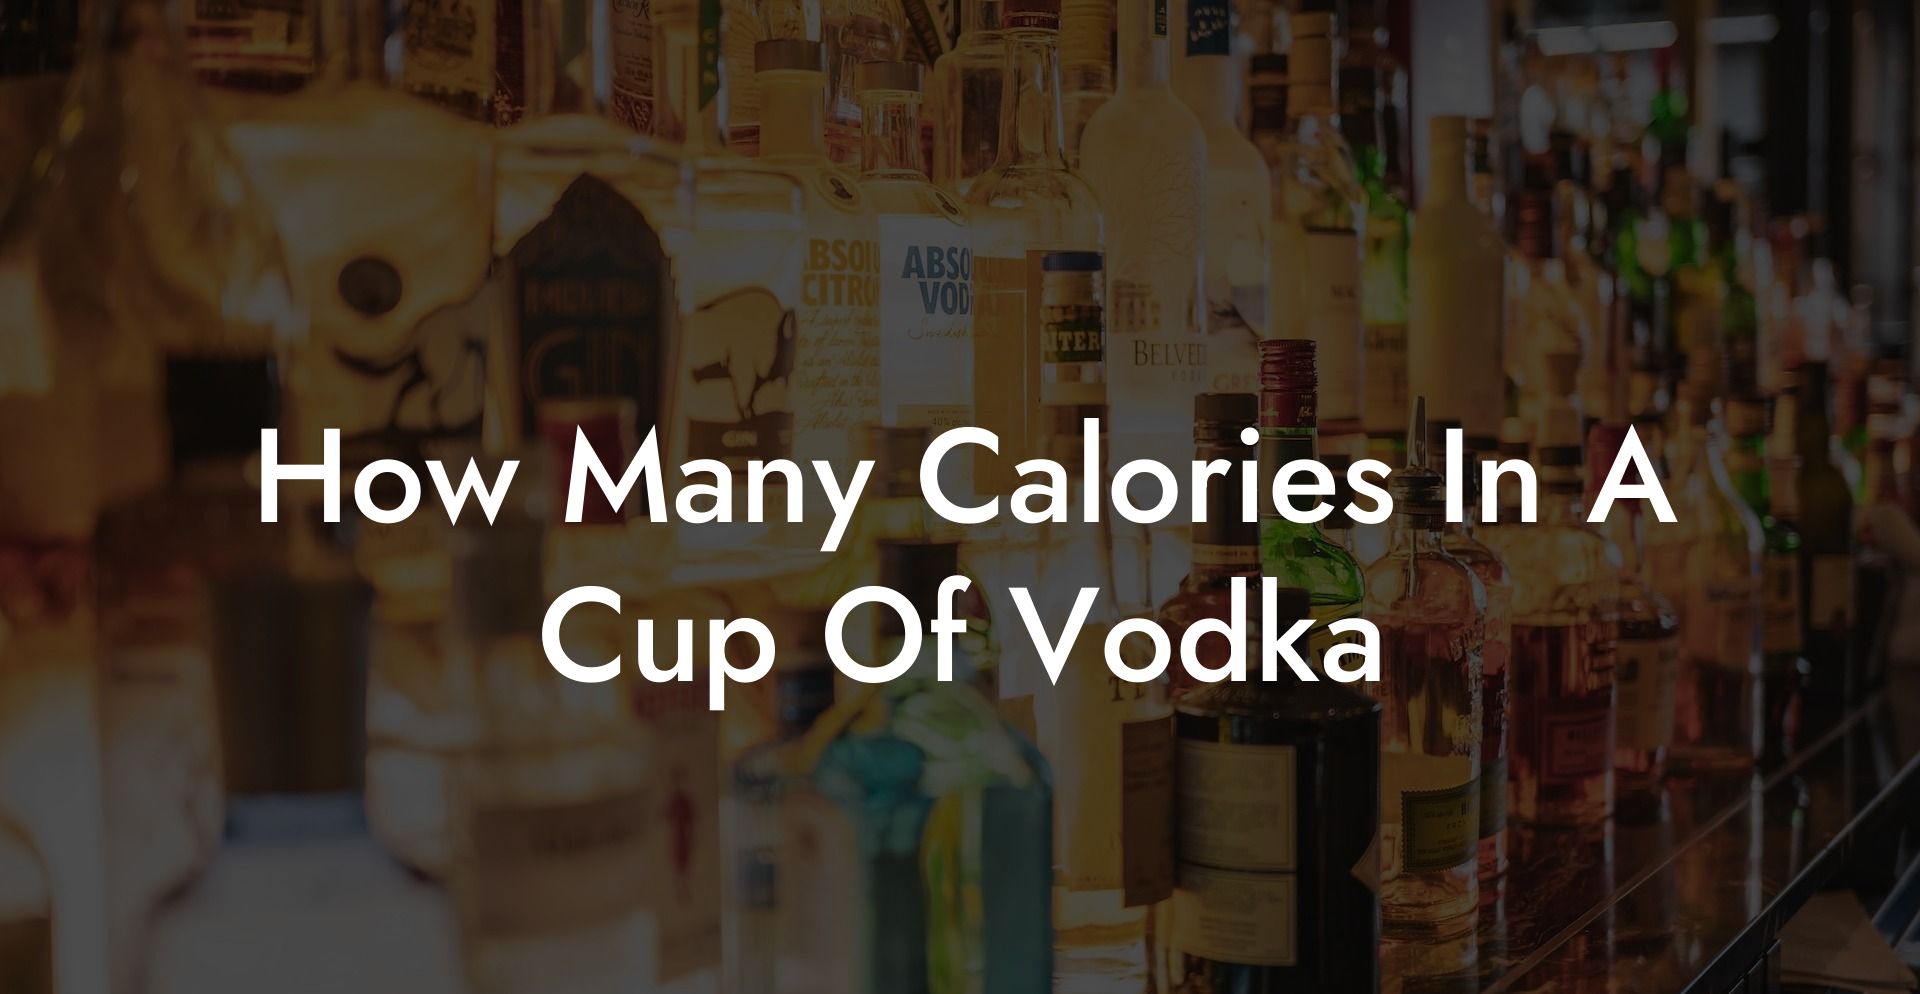 How Many Calories In A Cup Of Vodka